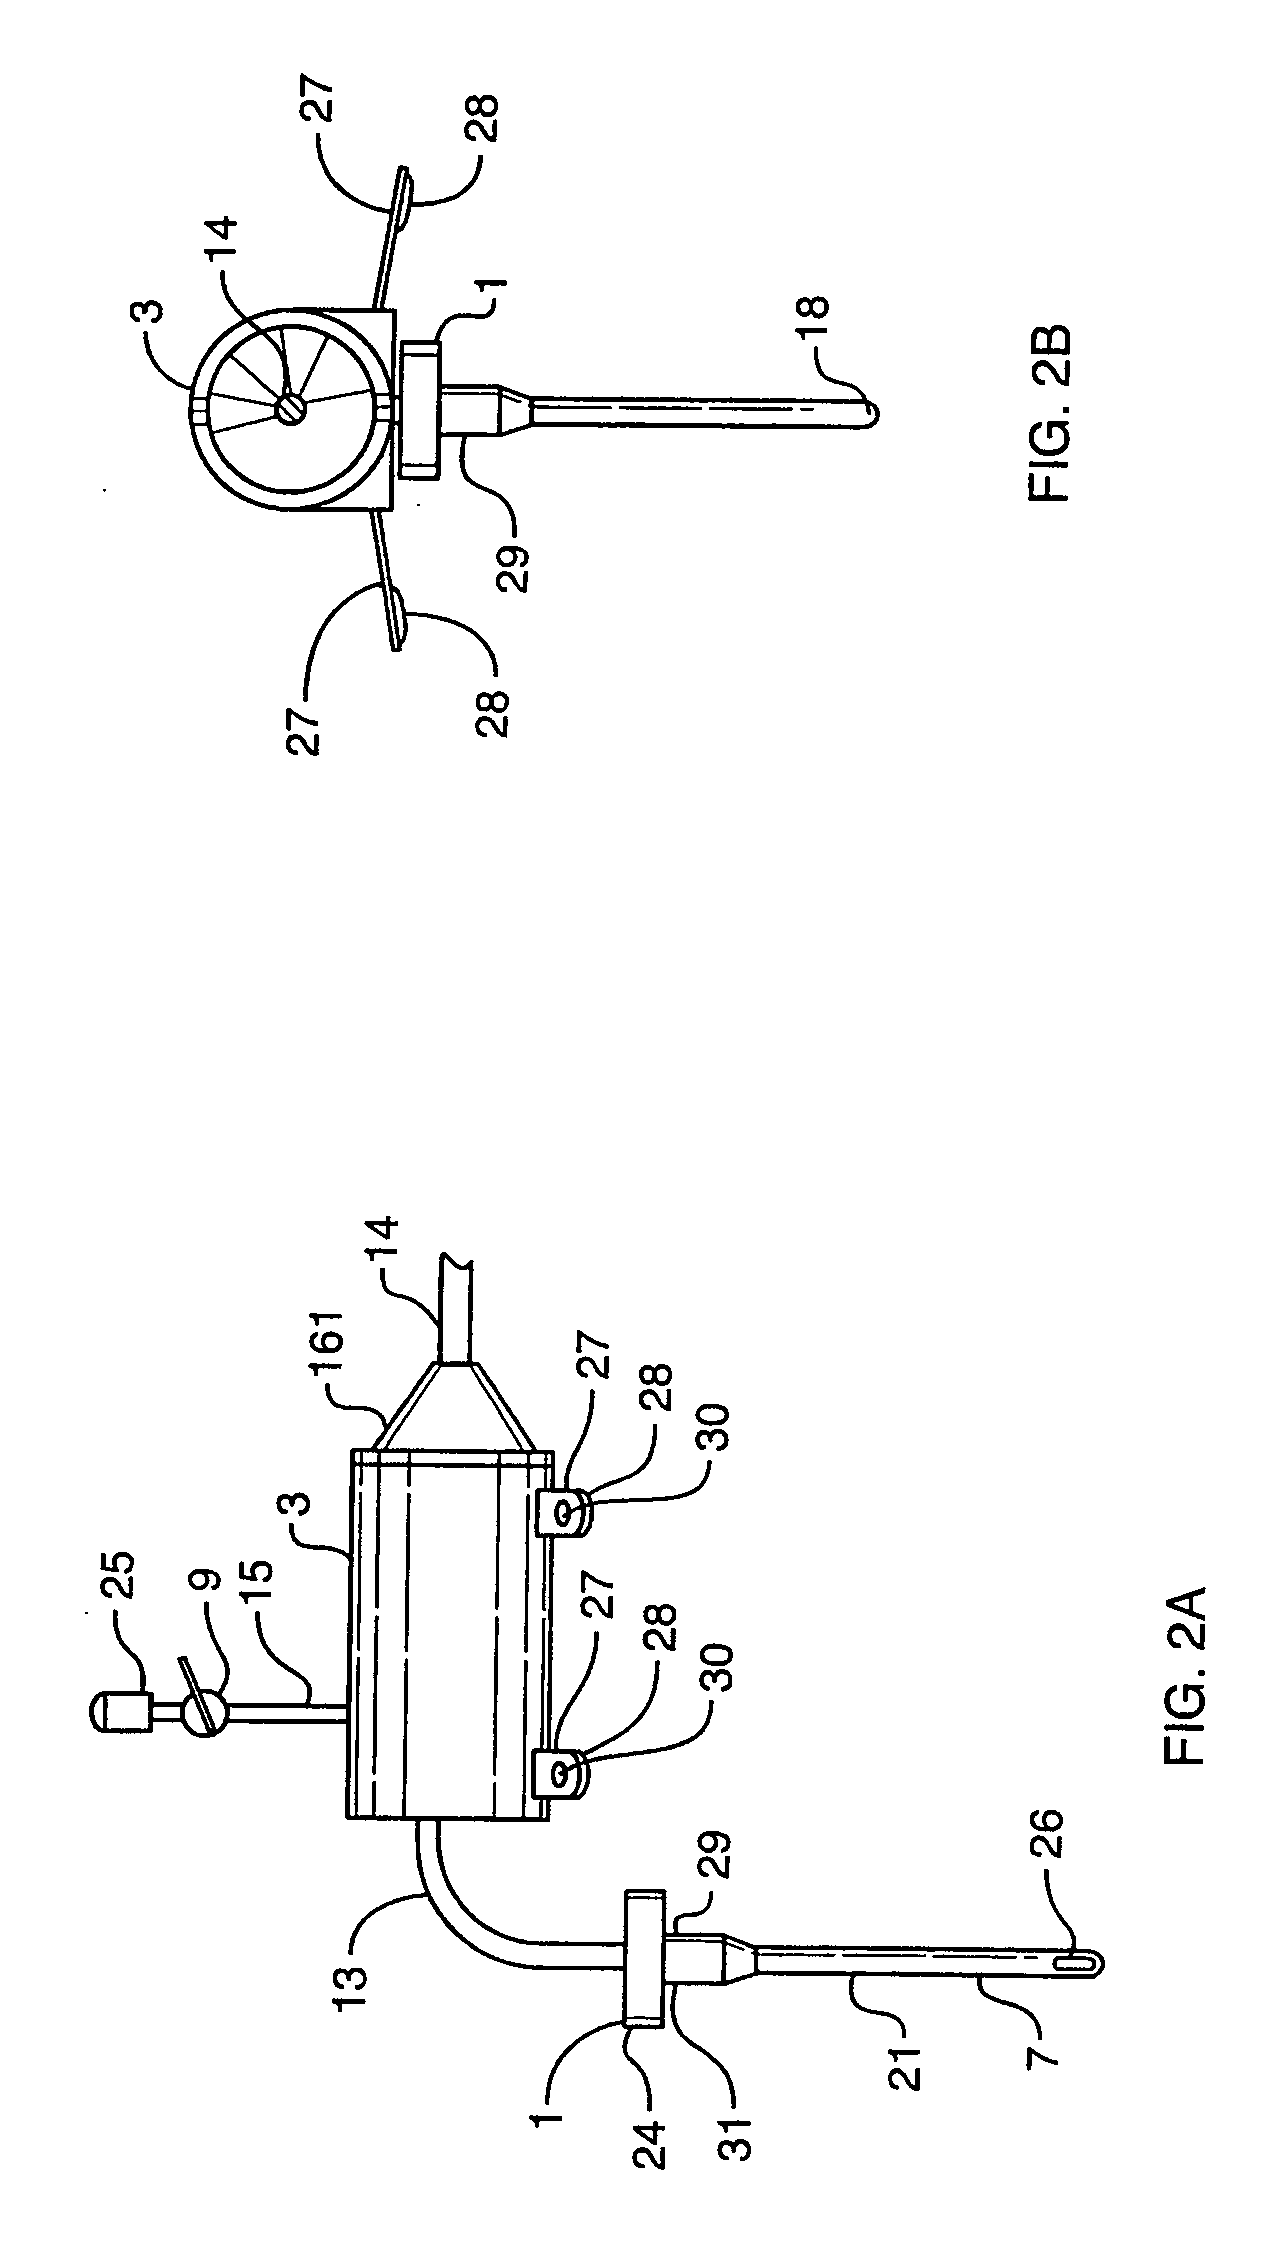 Method and device for reducing secondary brain injury